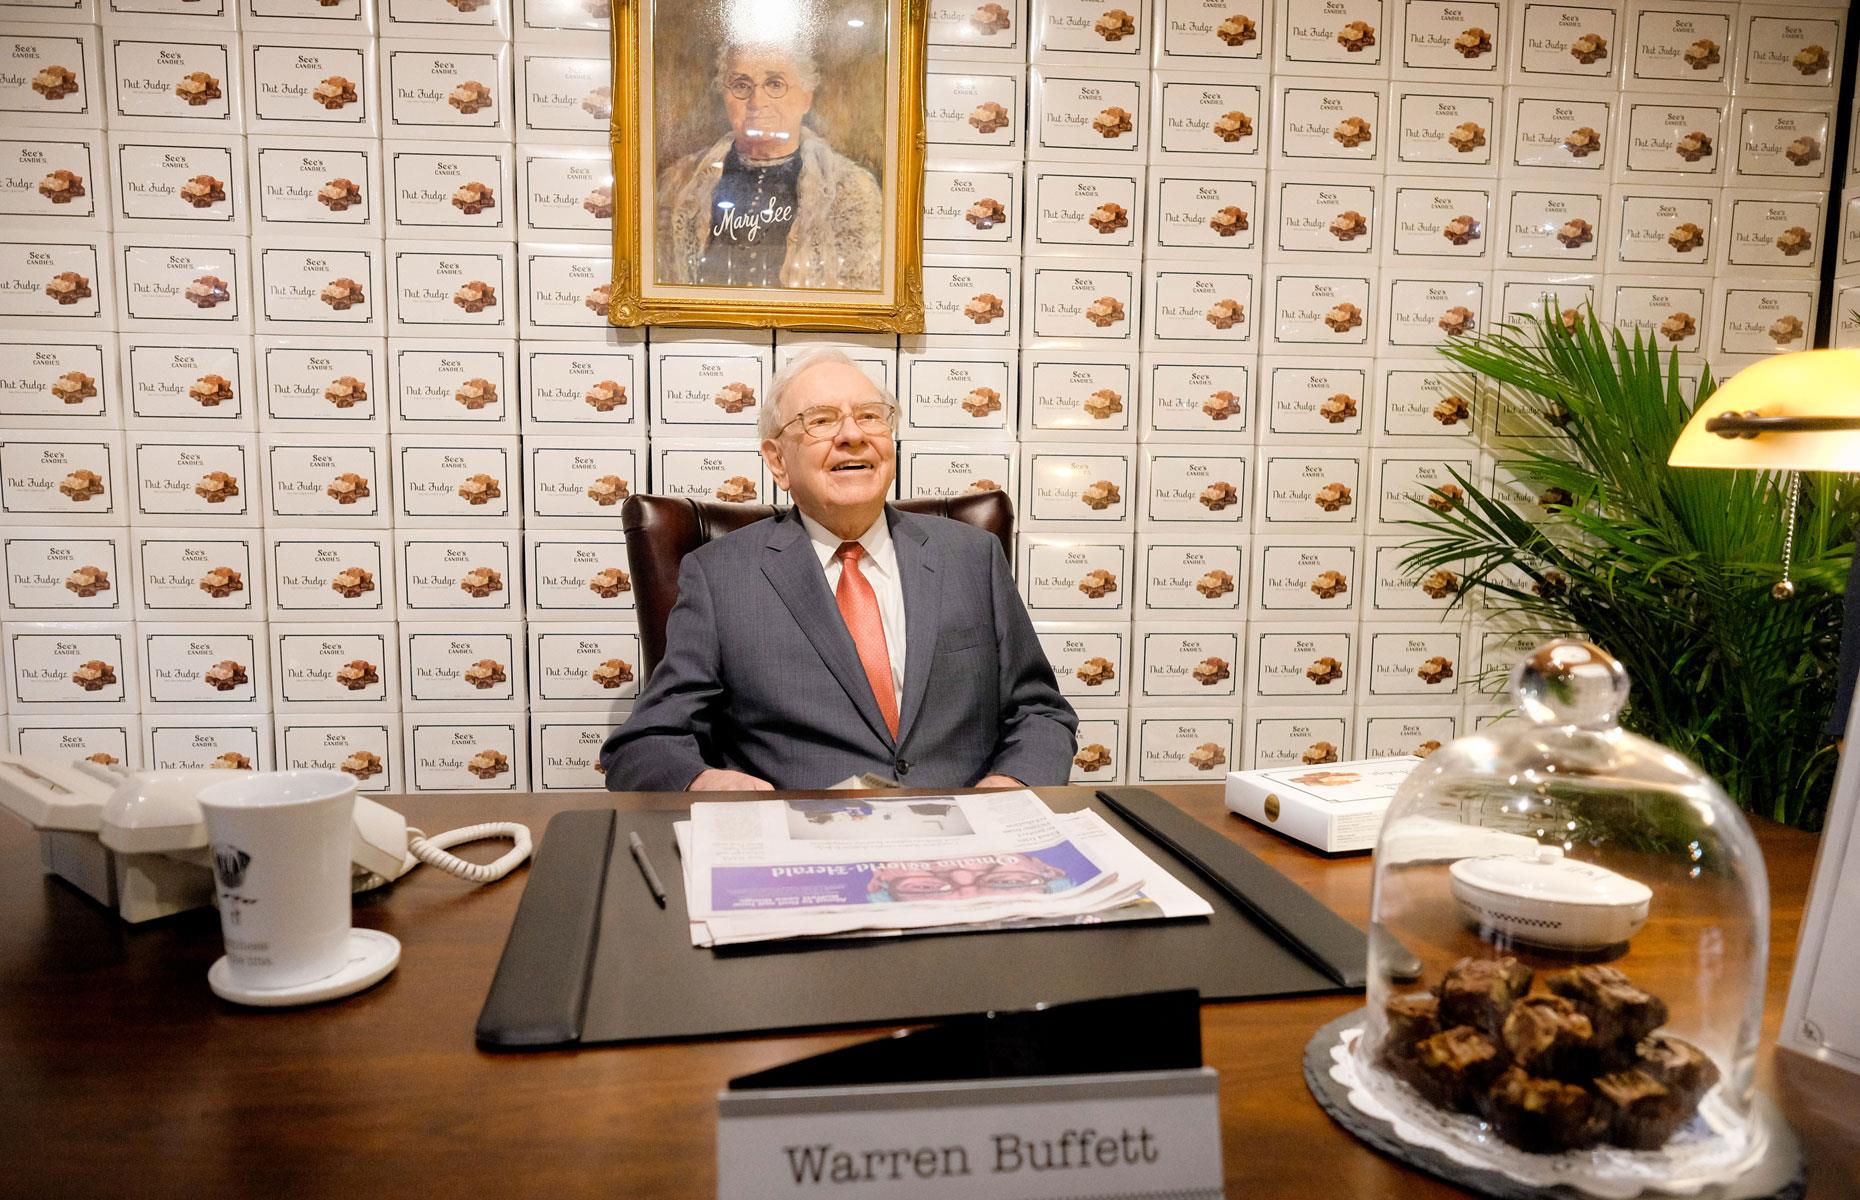 Warren Buffett – small sums compound, so invest every penny you can